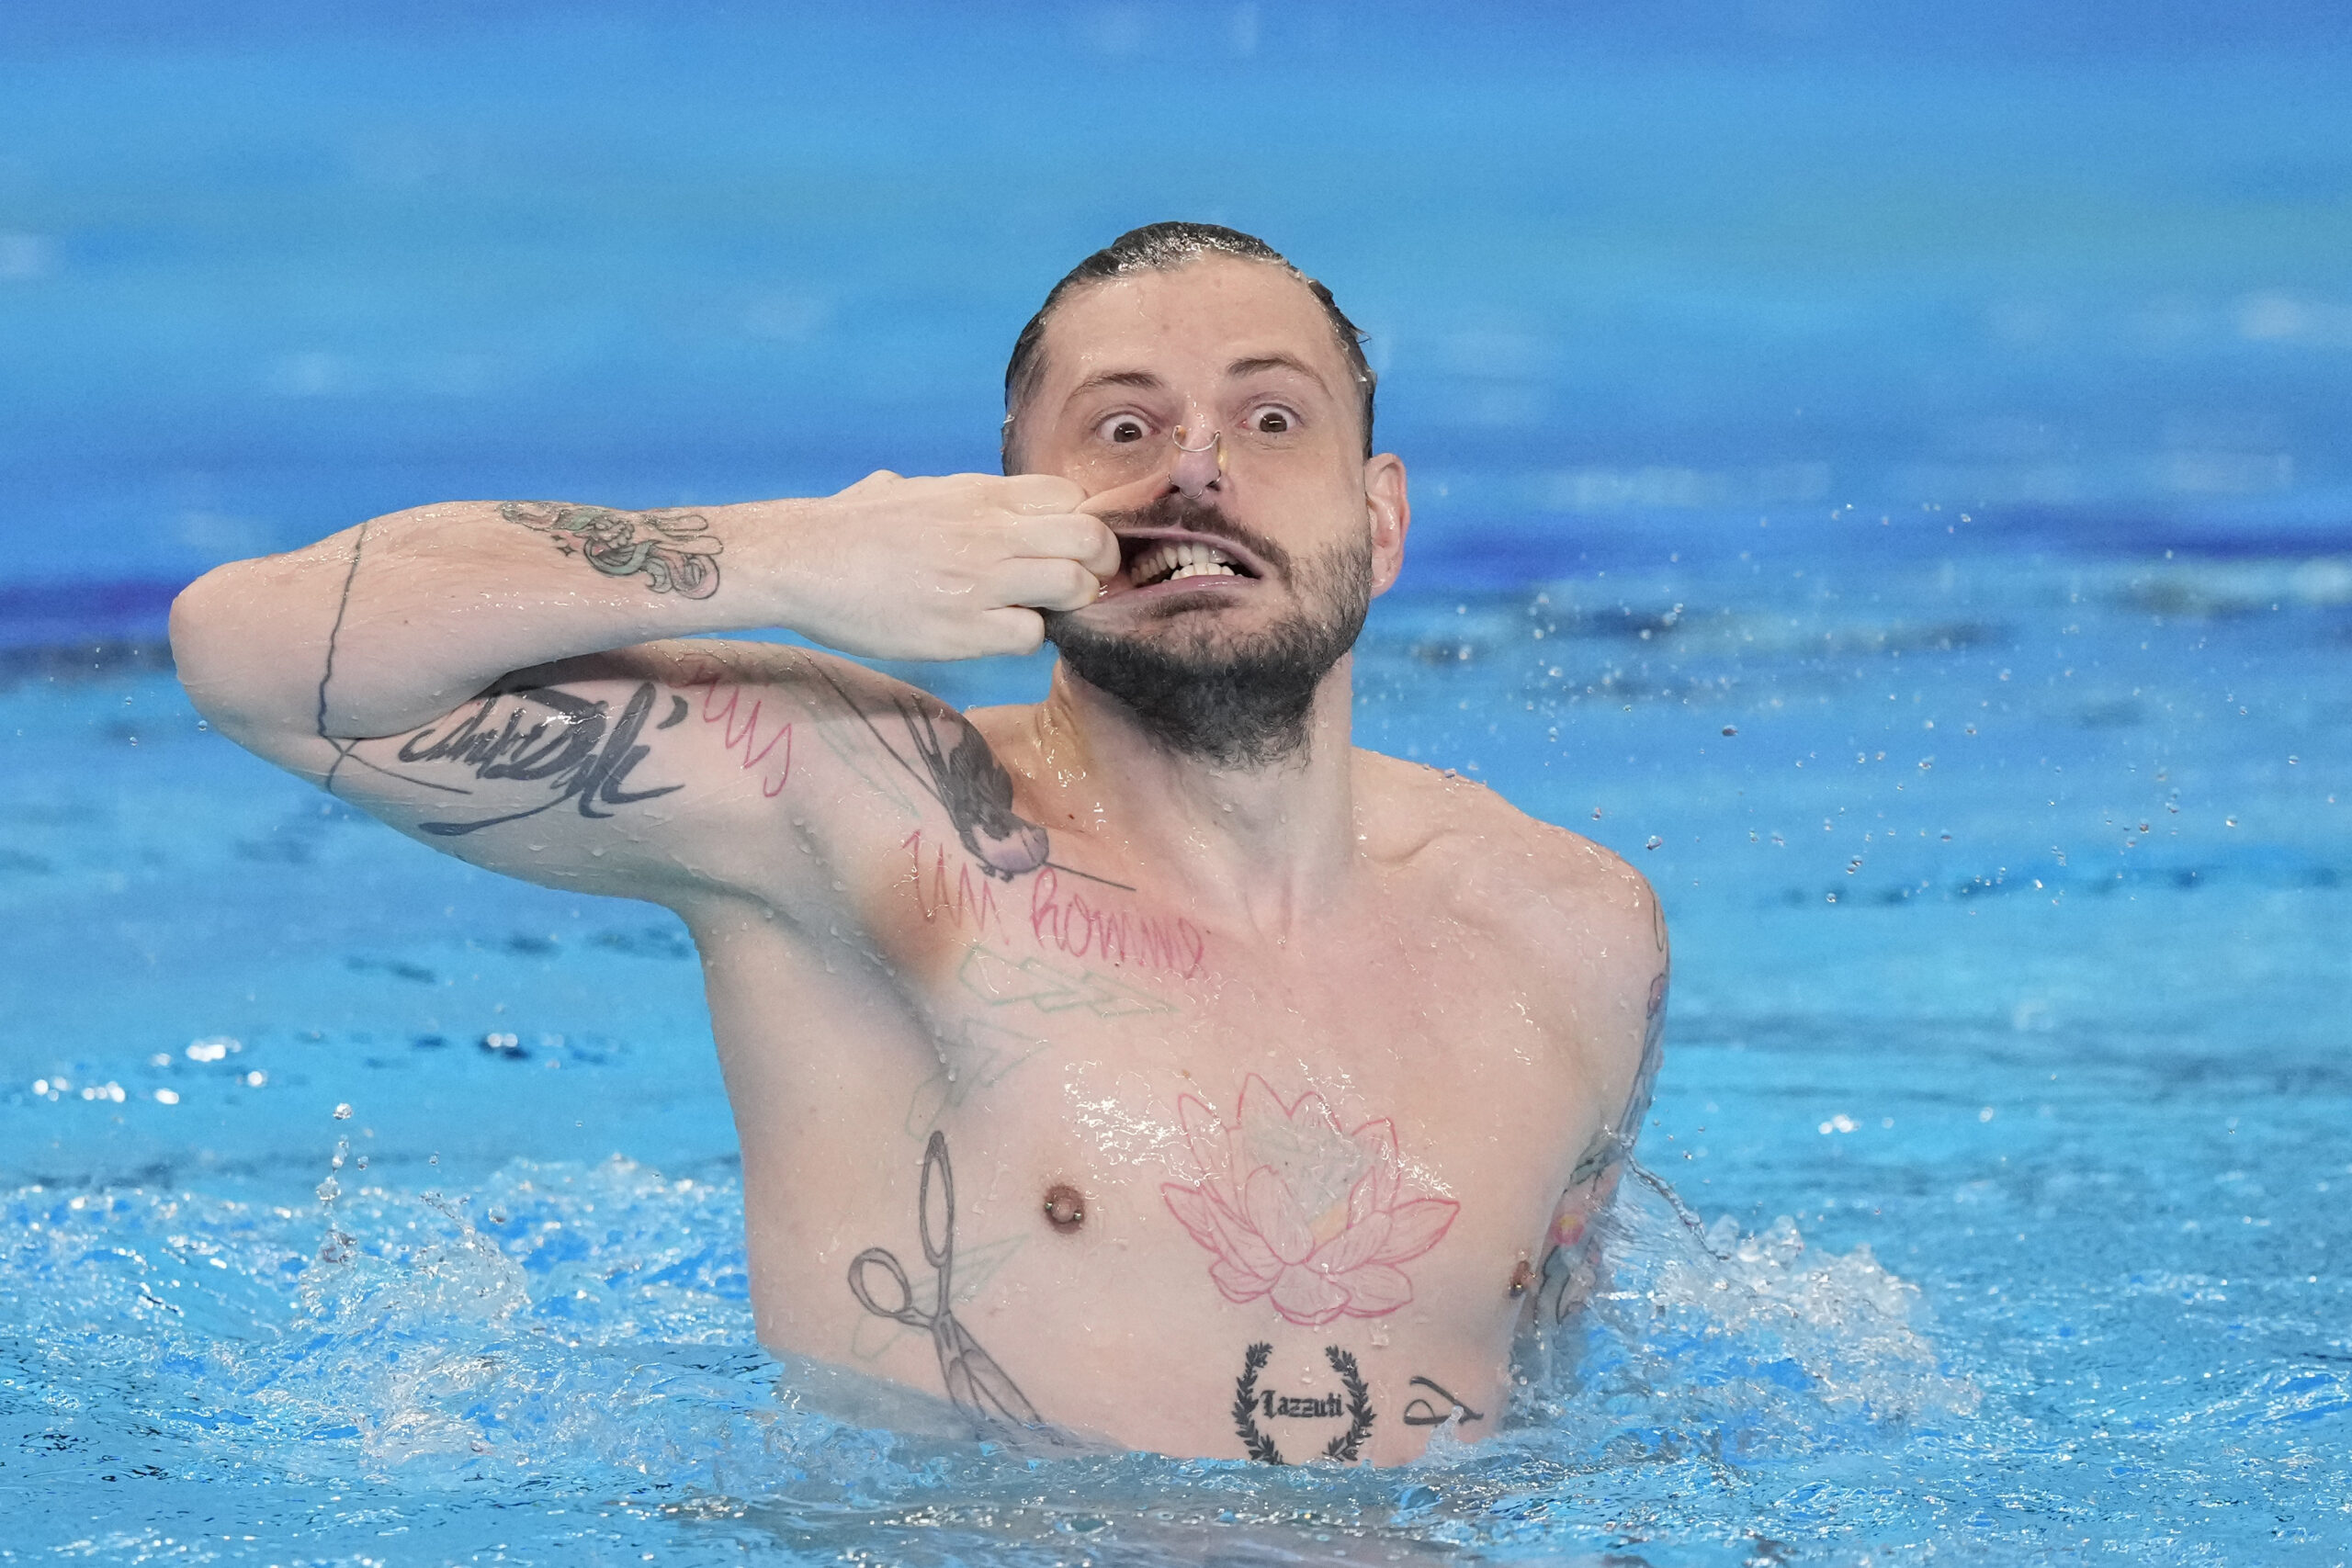 QATAR — ‘My next piercing will be a fish hook’: Renaud Barral of Belgium competes in the men's solo free of artistic swimming at the World Aquatics Championships in Doha, Qatar, Tuesday, Feb. 6, 2024.Photo: Lee Jin-man/AP